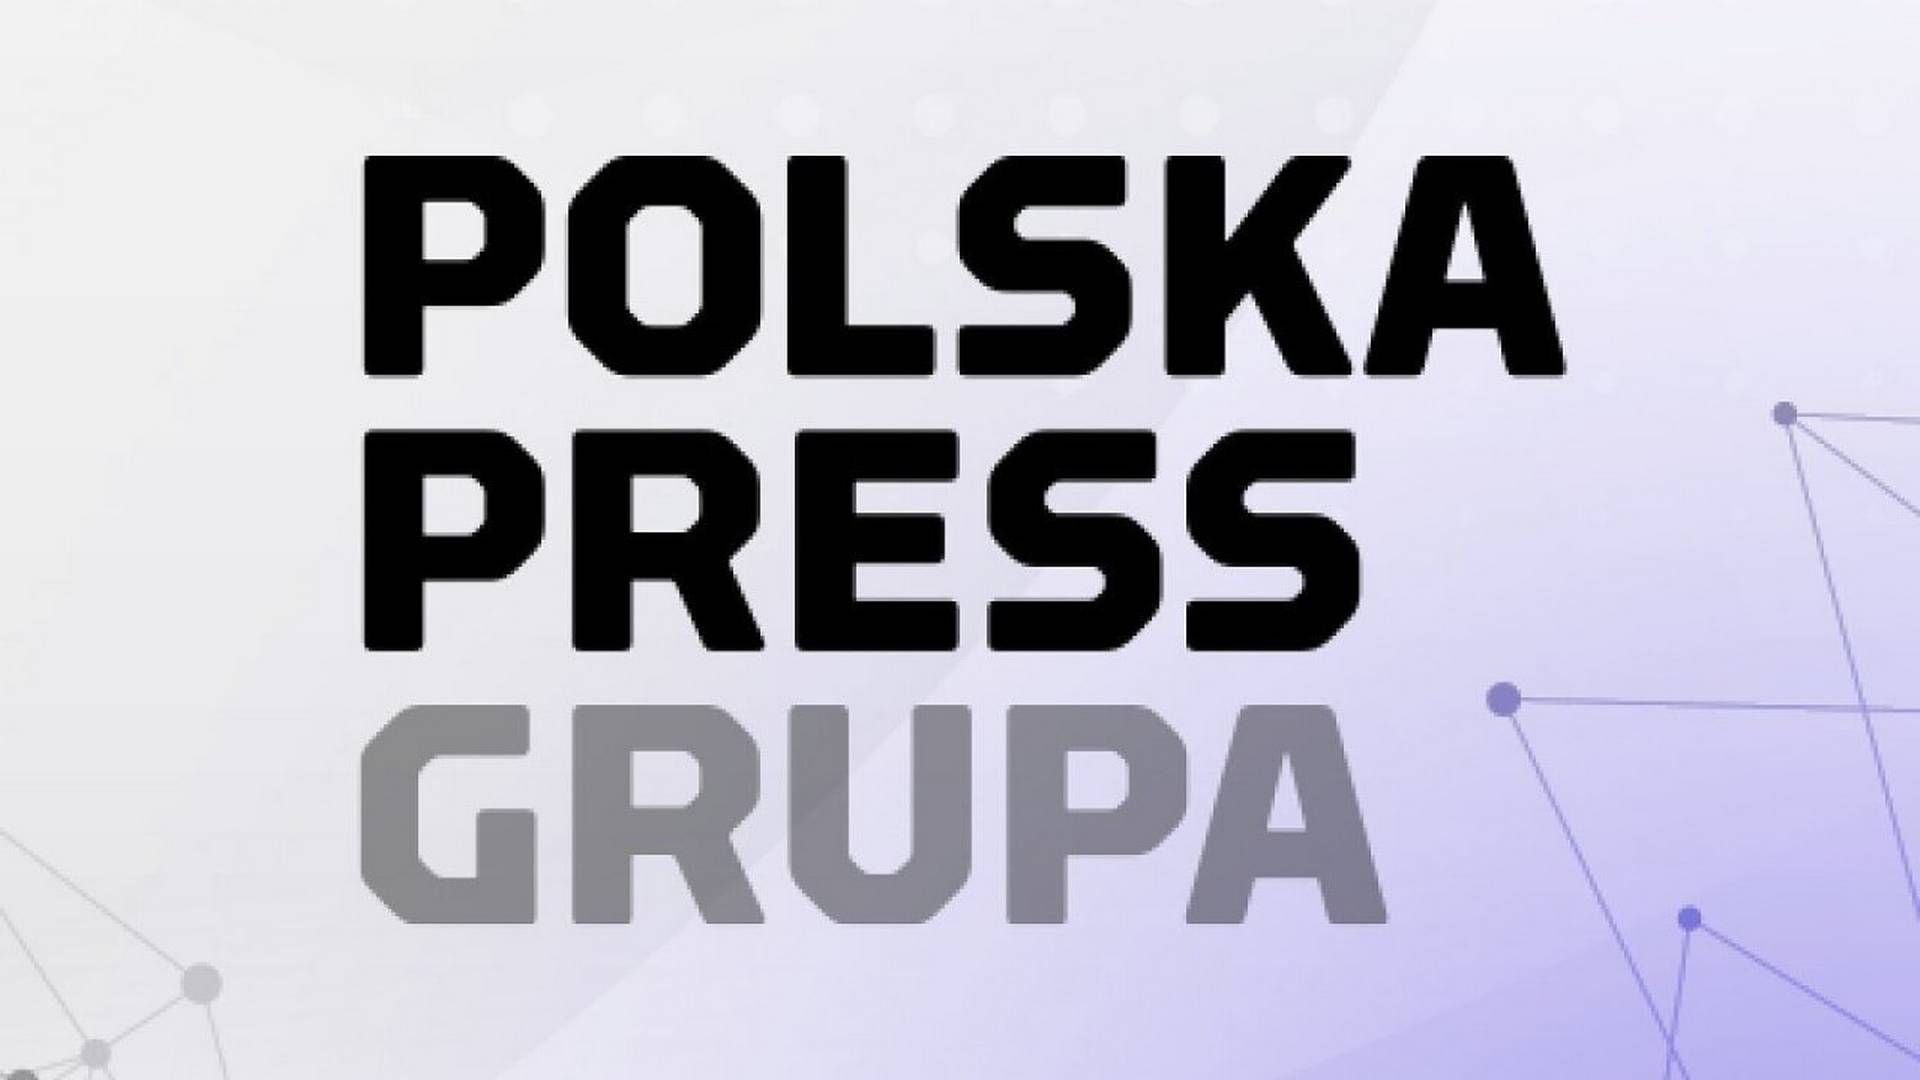 The Norwegian oil fund's Council on Ethics believes that press freedom in Poland may be under threat due to the acquisition of news publisher Polska Press. | Photo: Polska Press